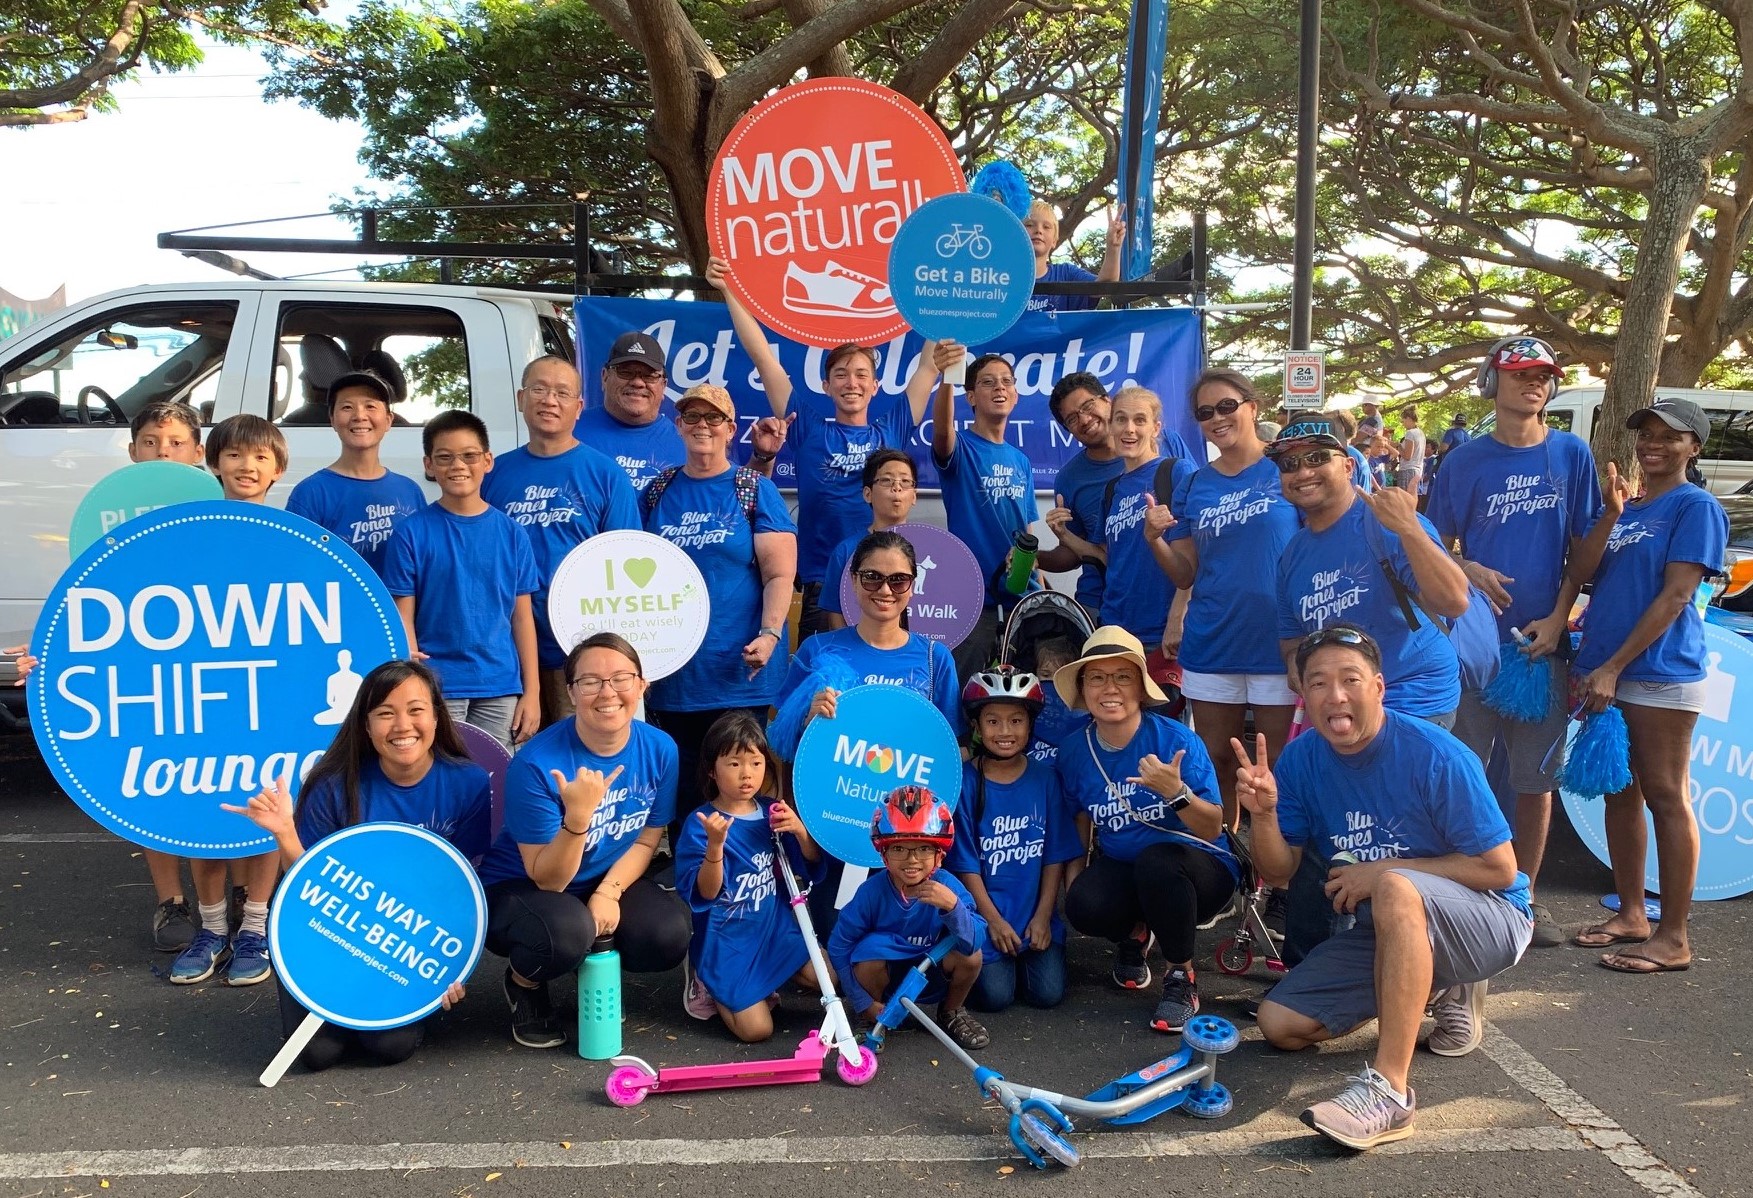 Blue Zones supporters for the Maui Fair Parade pose with posters promoting healthy lifestyles on October 3, 2019